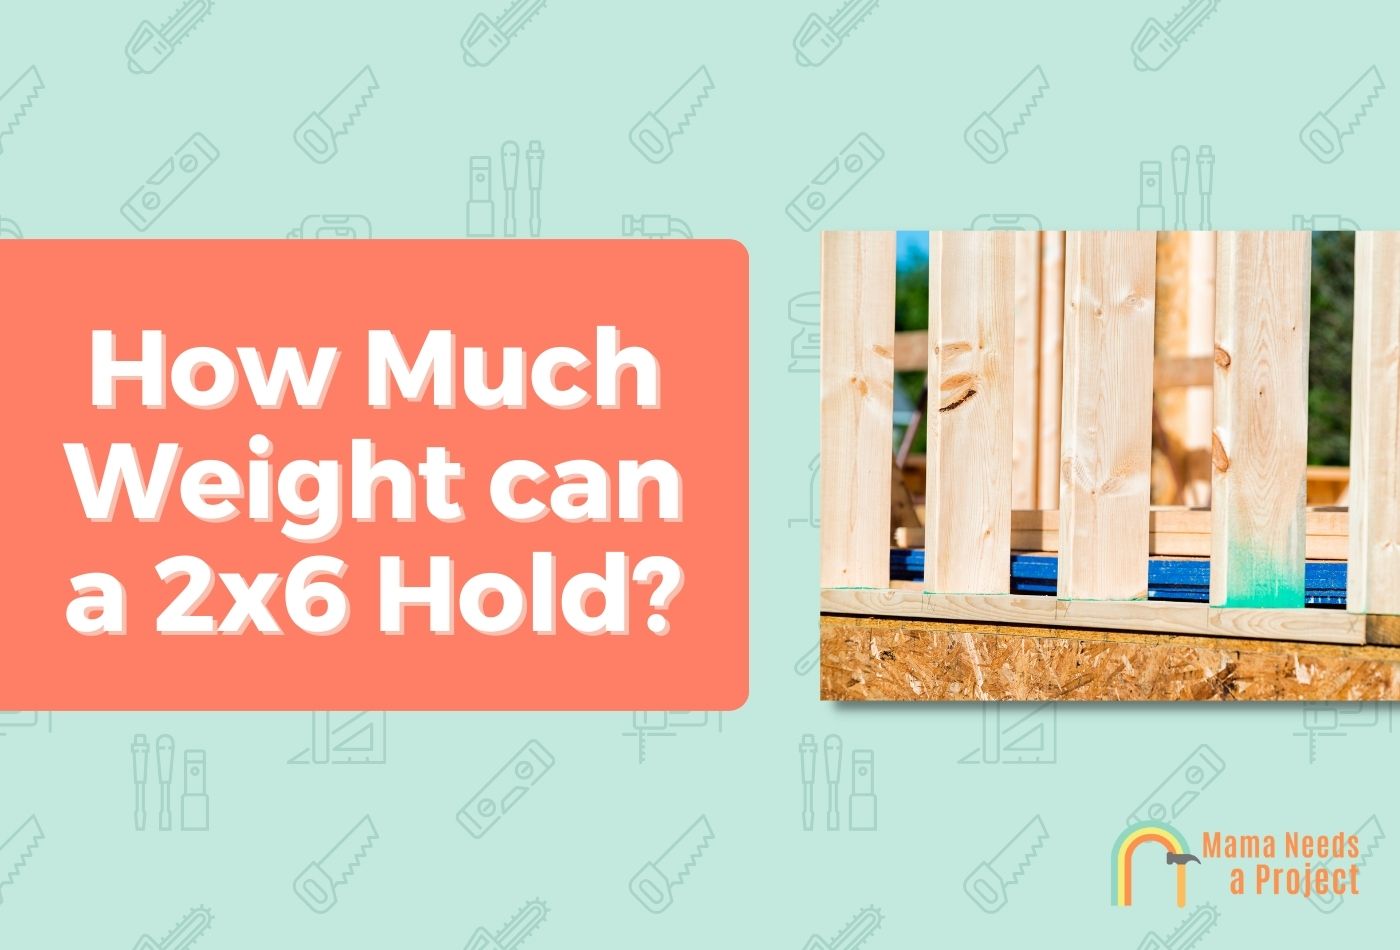 How Much Weight can a 2x6 Hold